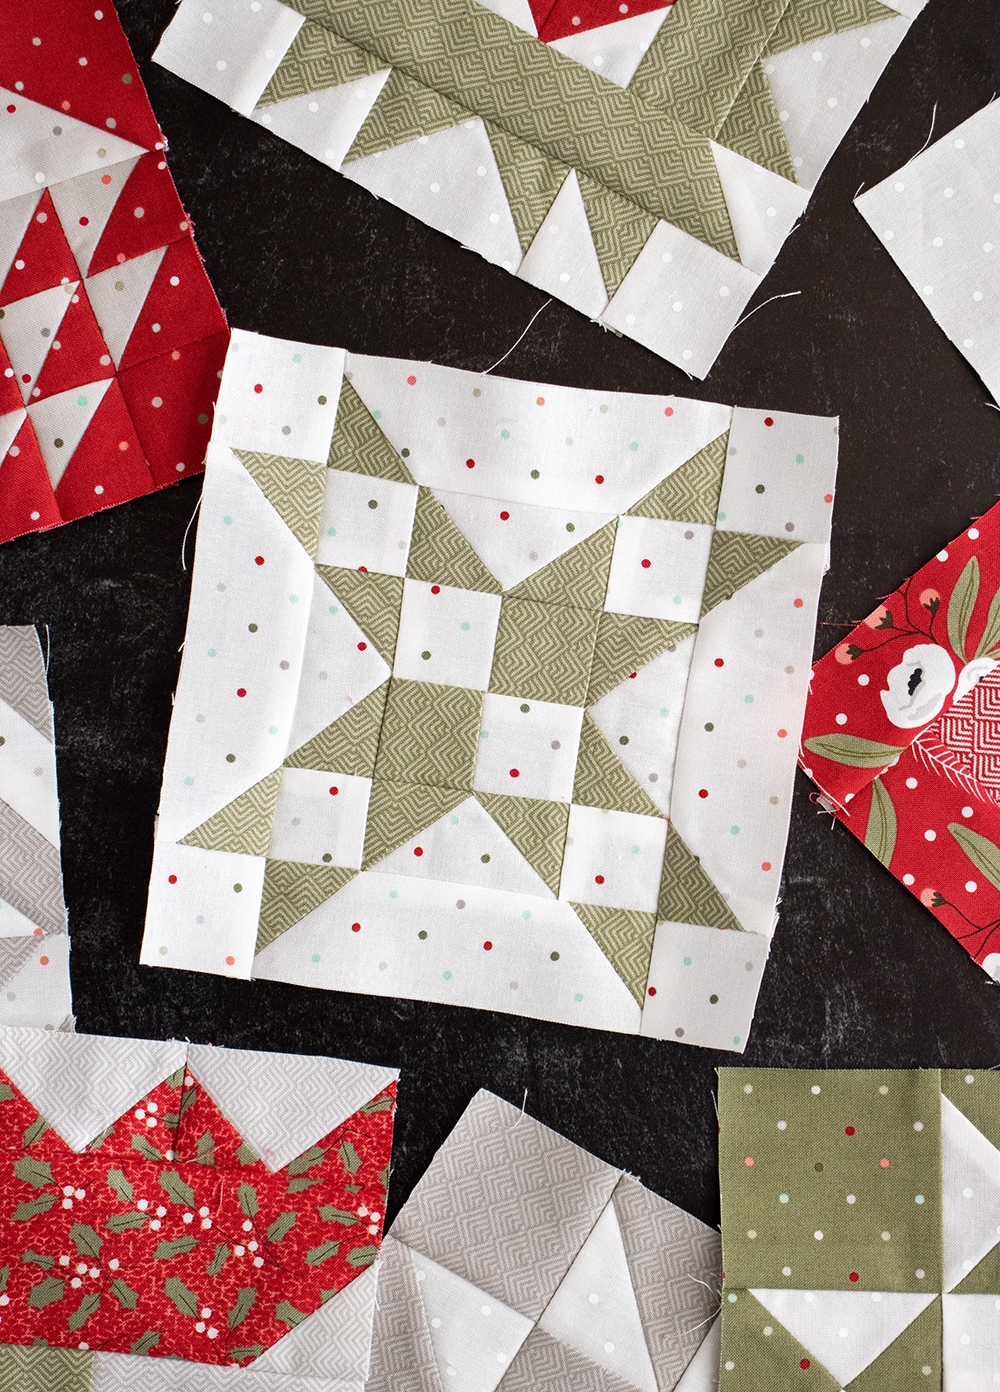 Sewcialites Quilt Along: Free Block of the Week by Fat Quarter Shop. Block 36 is "Kindness" by Corey Yoder of Coriander Quilts. Fabric is Christmas Morning by Lella Boutique for Moda Fabrics.